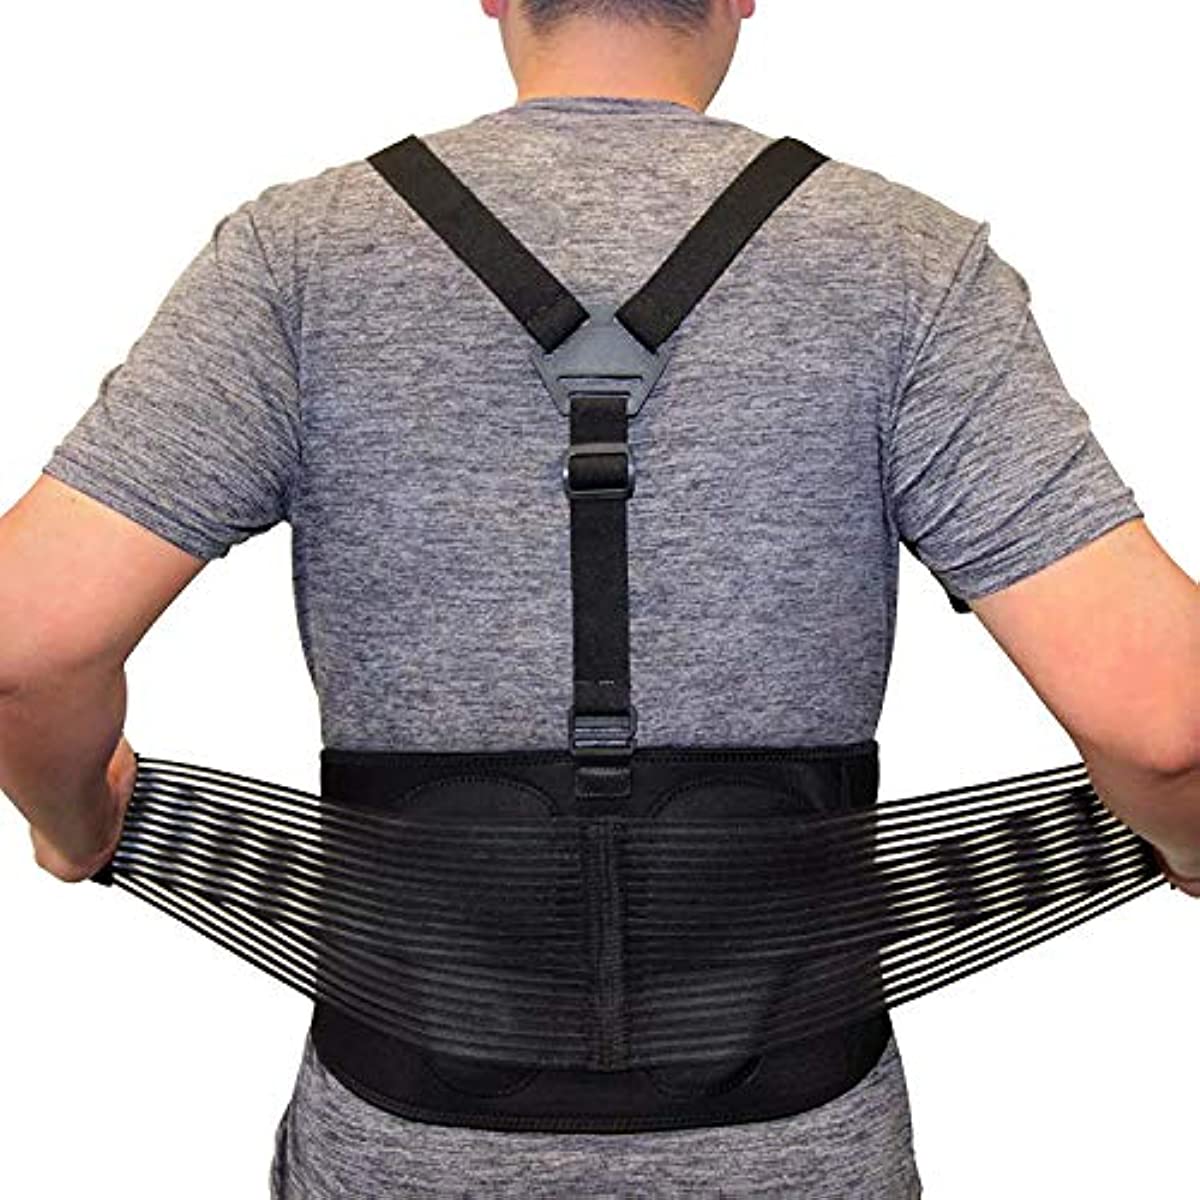 AllyFlex Sports Back Brace for Heavy Lifting Safety Belt, 3-Way Adjustable Suspenders with Dual Lumbar Pads for Lower Back Support and Injury Prevention, Large